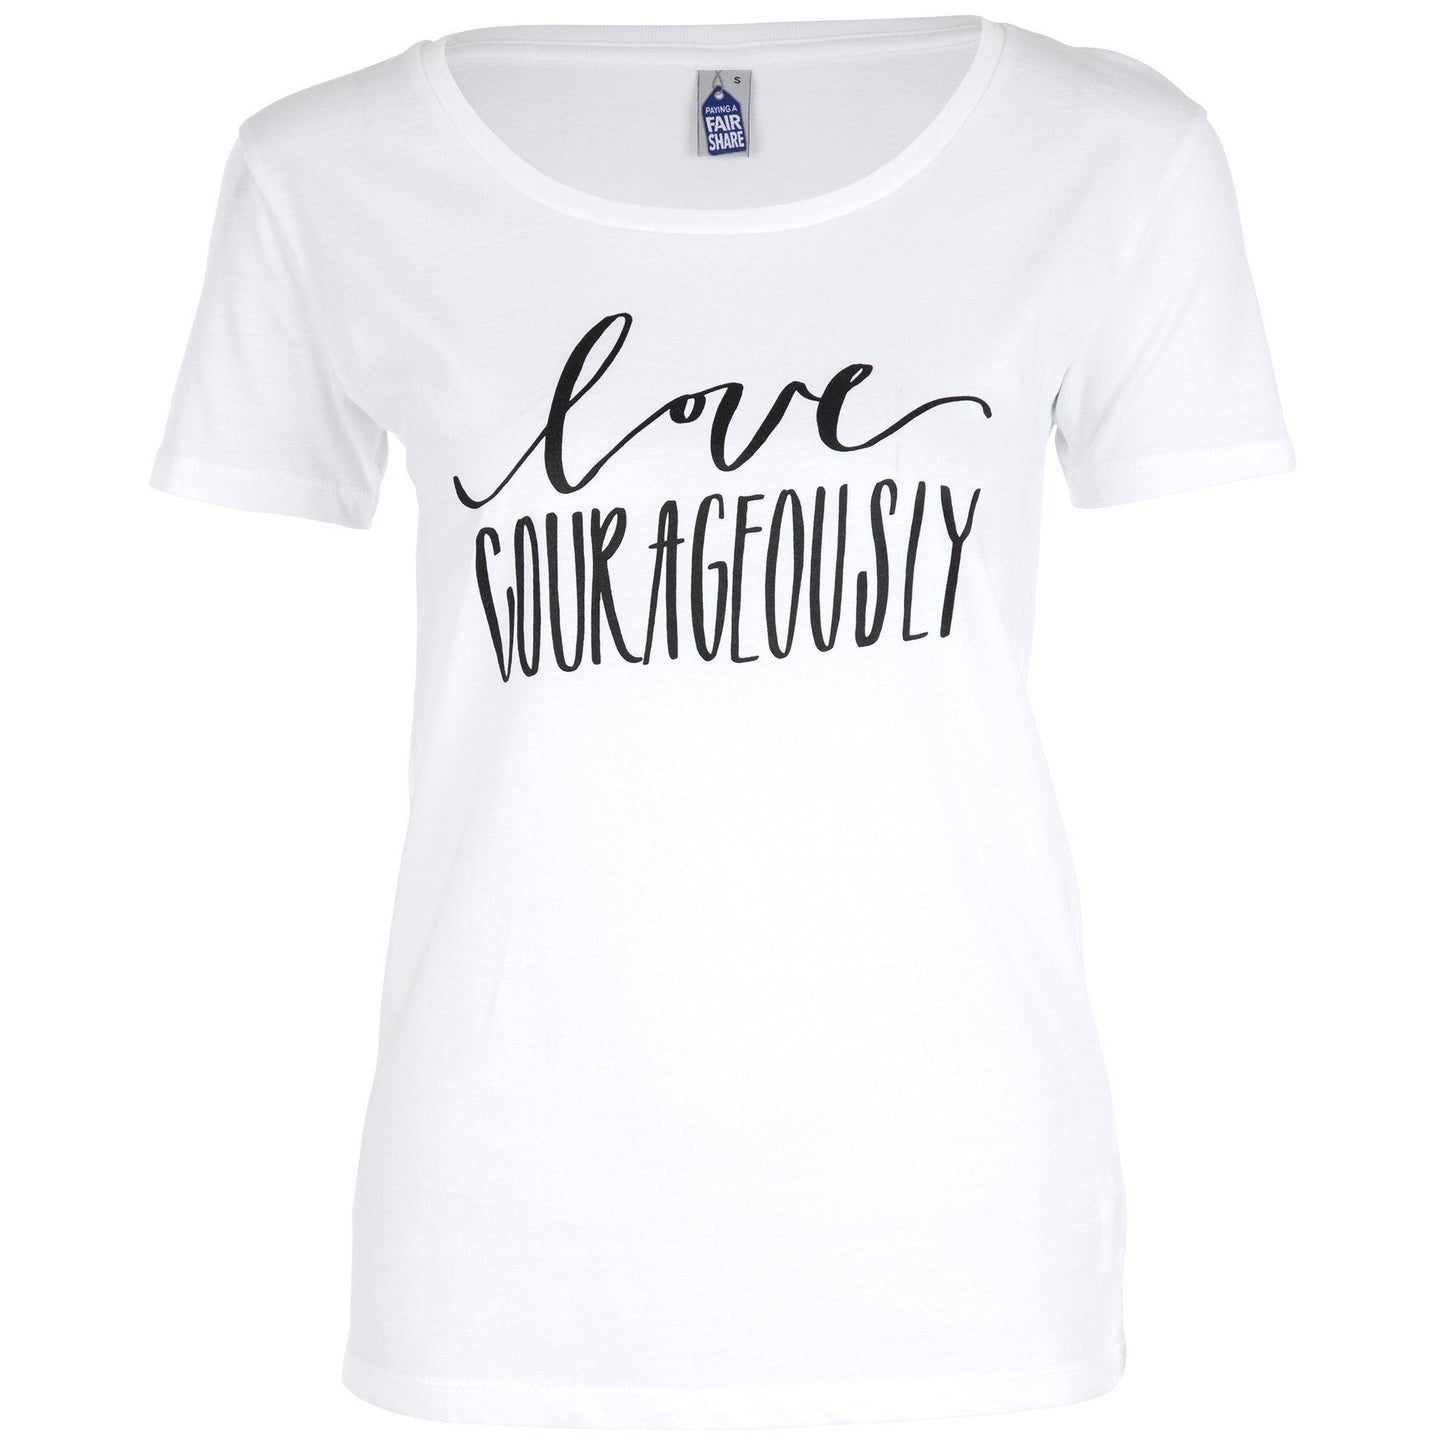 Love Courageously Tee